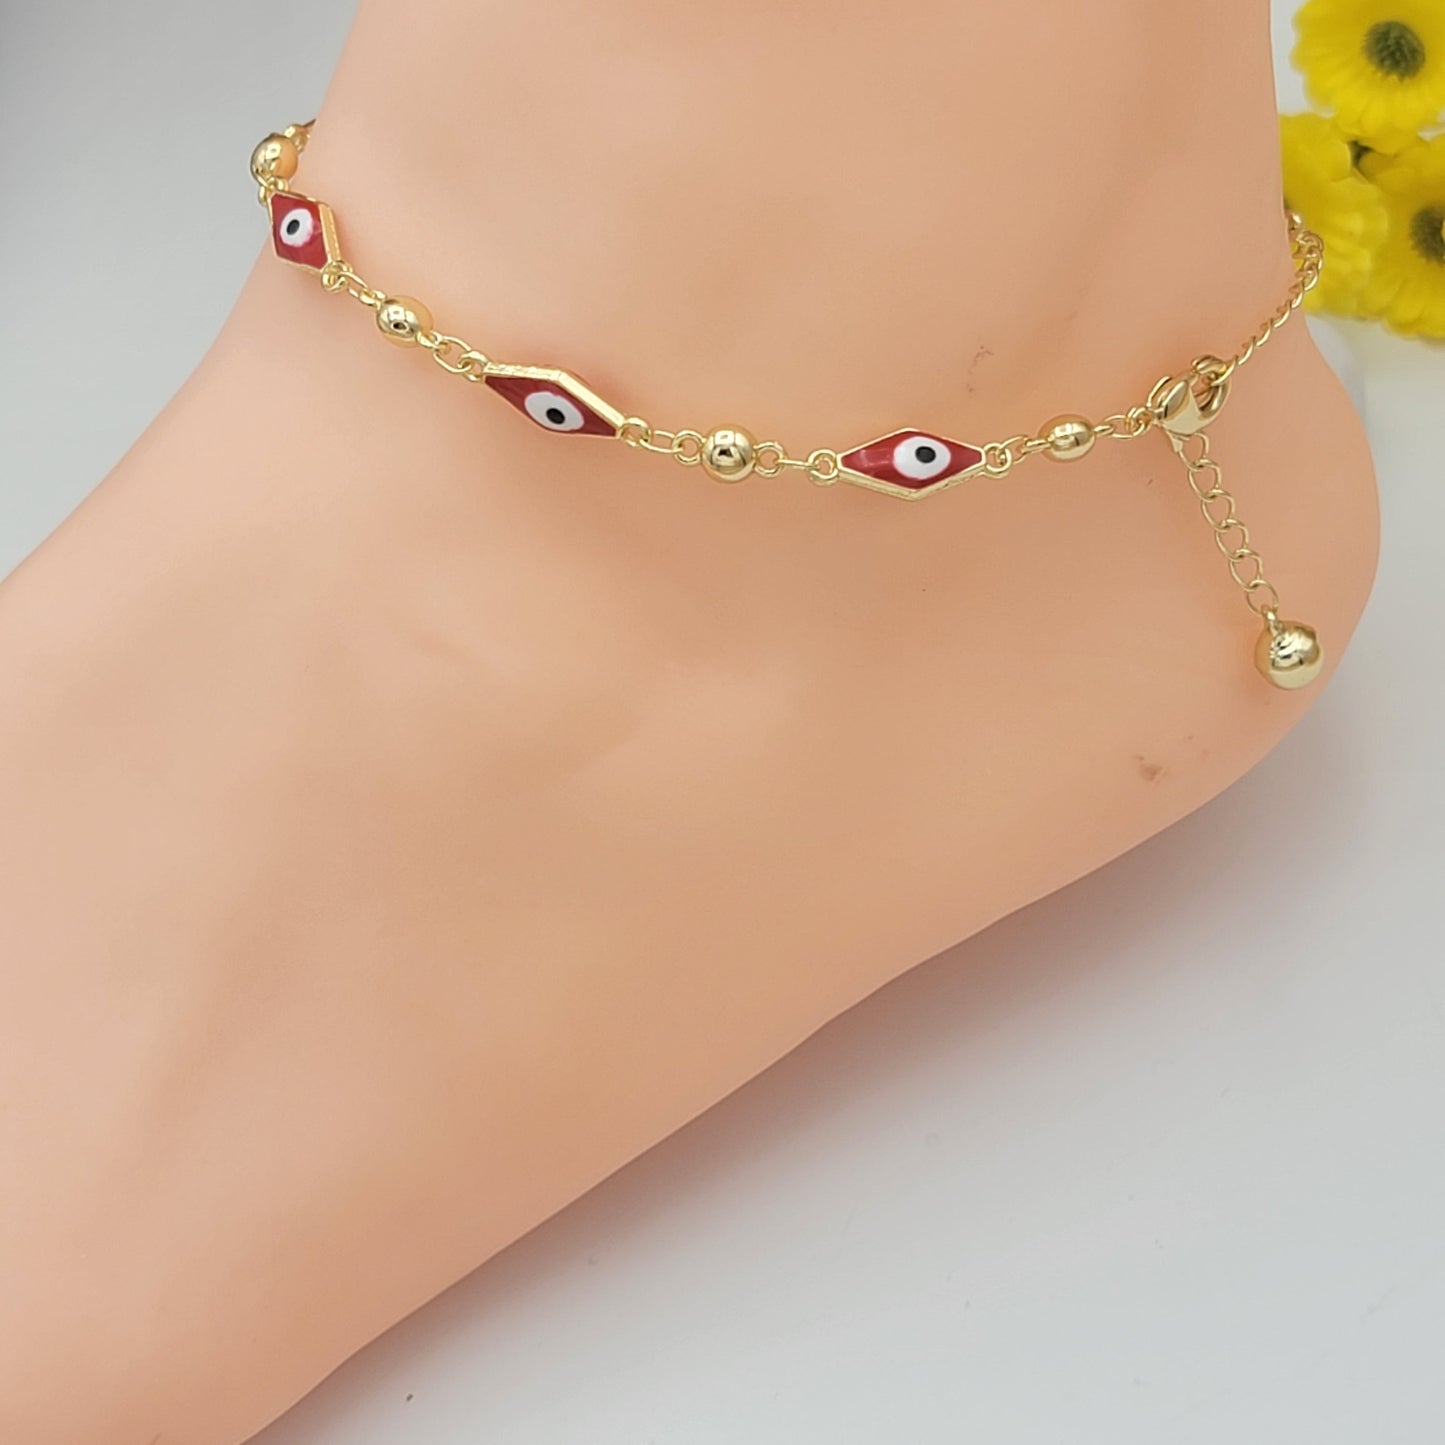 Anklets - 14K Gold Plated. Red Eye Chain.